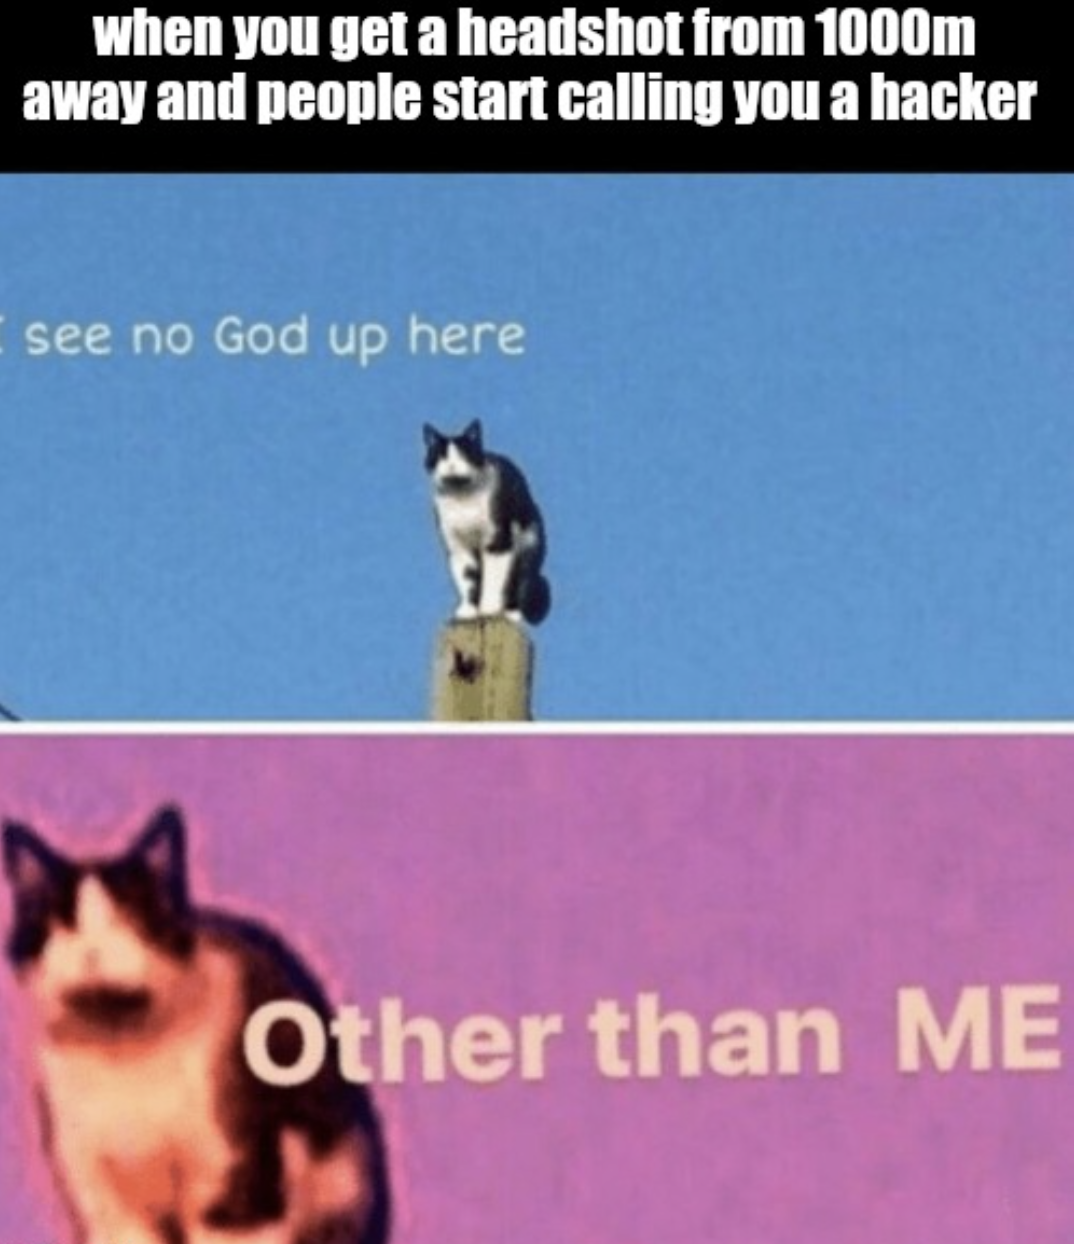 gaming memes - funny sayings - when you get a headshot from 1000m away and people start calling you a hacker see no God up here Other than Me